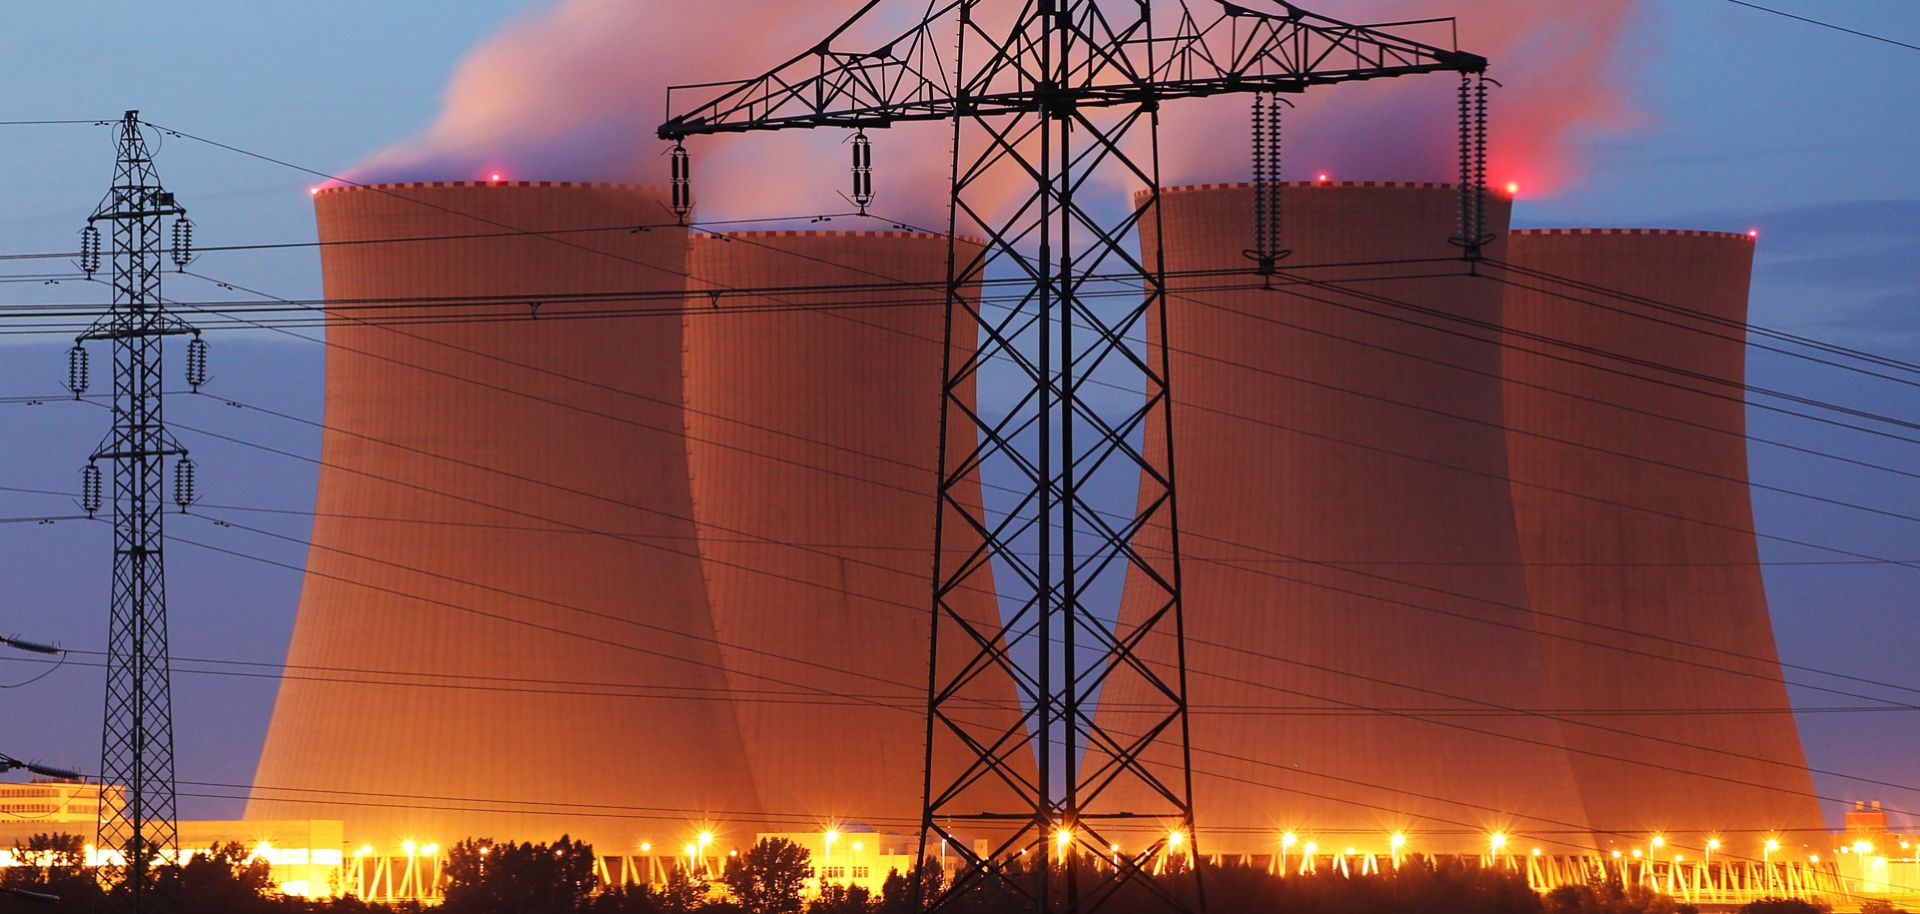 Streetlights illuminate the four cooling towers of the Temelin nuclear power plant in the Czech Republic in 2011.